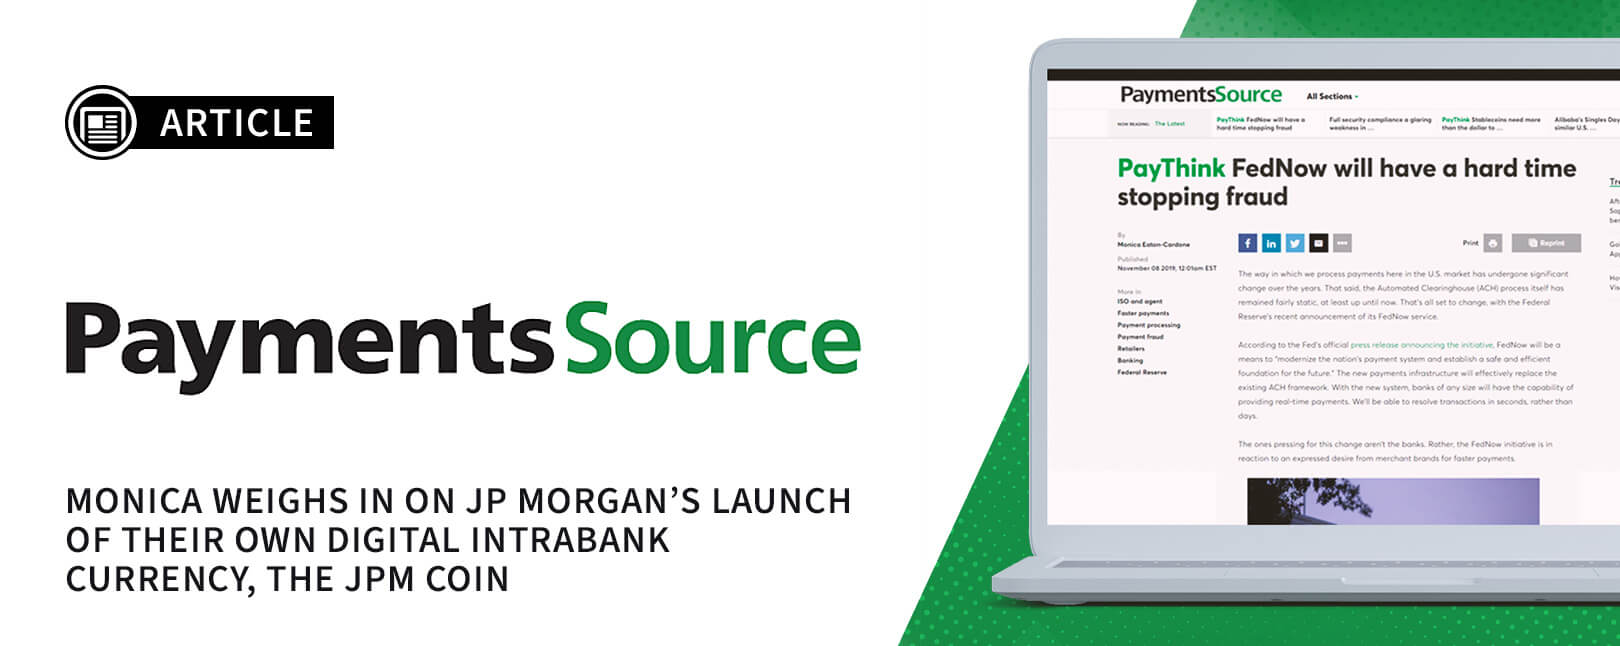 Monica Comments on JP Morgan’s Next Steps for PaymentSource